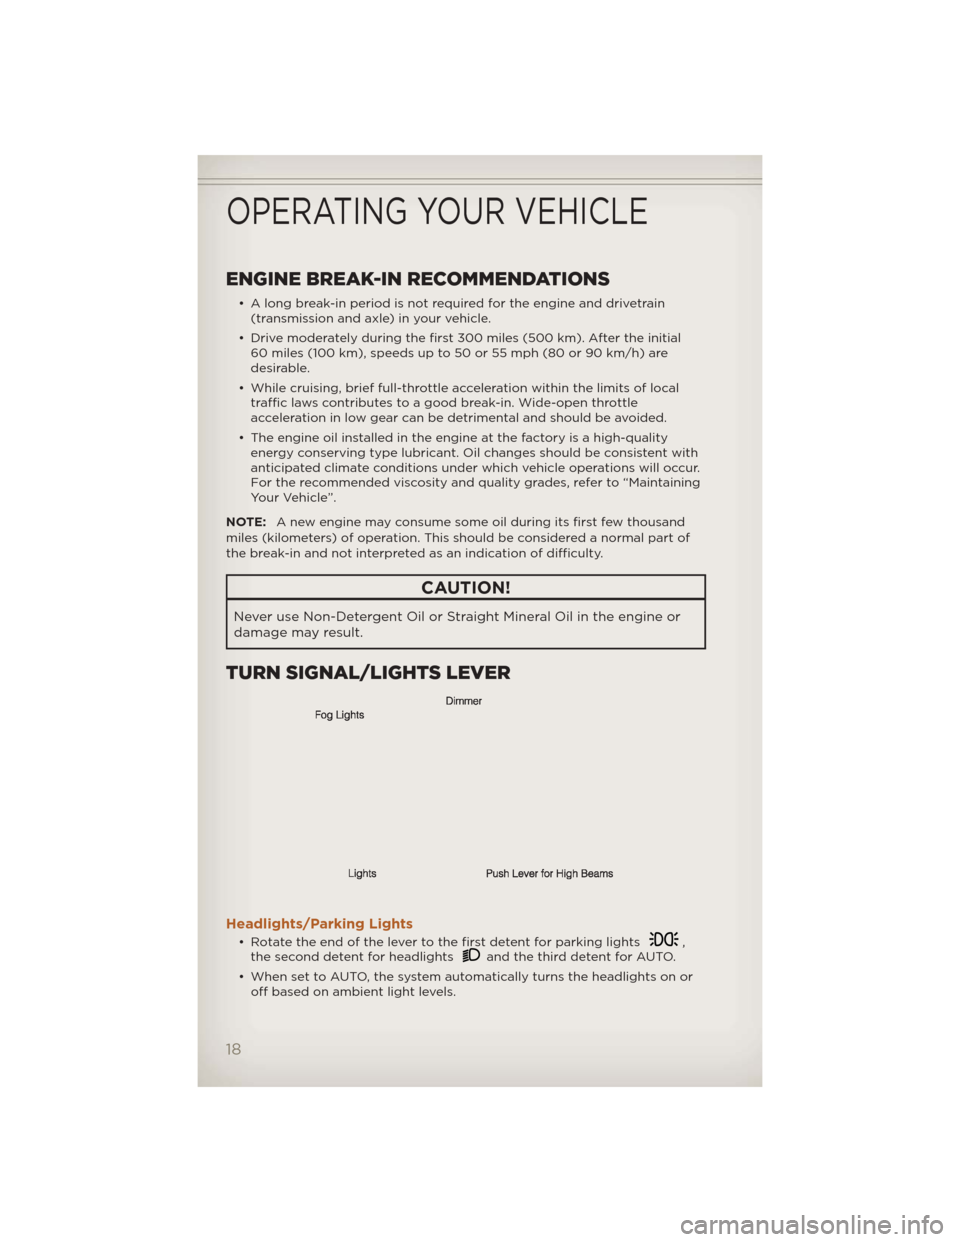 JEEP LIBERTY 2012 KK / 2.G User Guide ENGINE BREAK-IN RECOMMENDATIONS
• A long break-in period is not required for the engine and drivetrain(transmission and axle) in your vehicle.
• Drive moderately during the first 300 miles (500 km